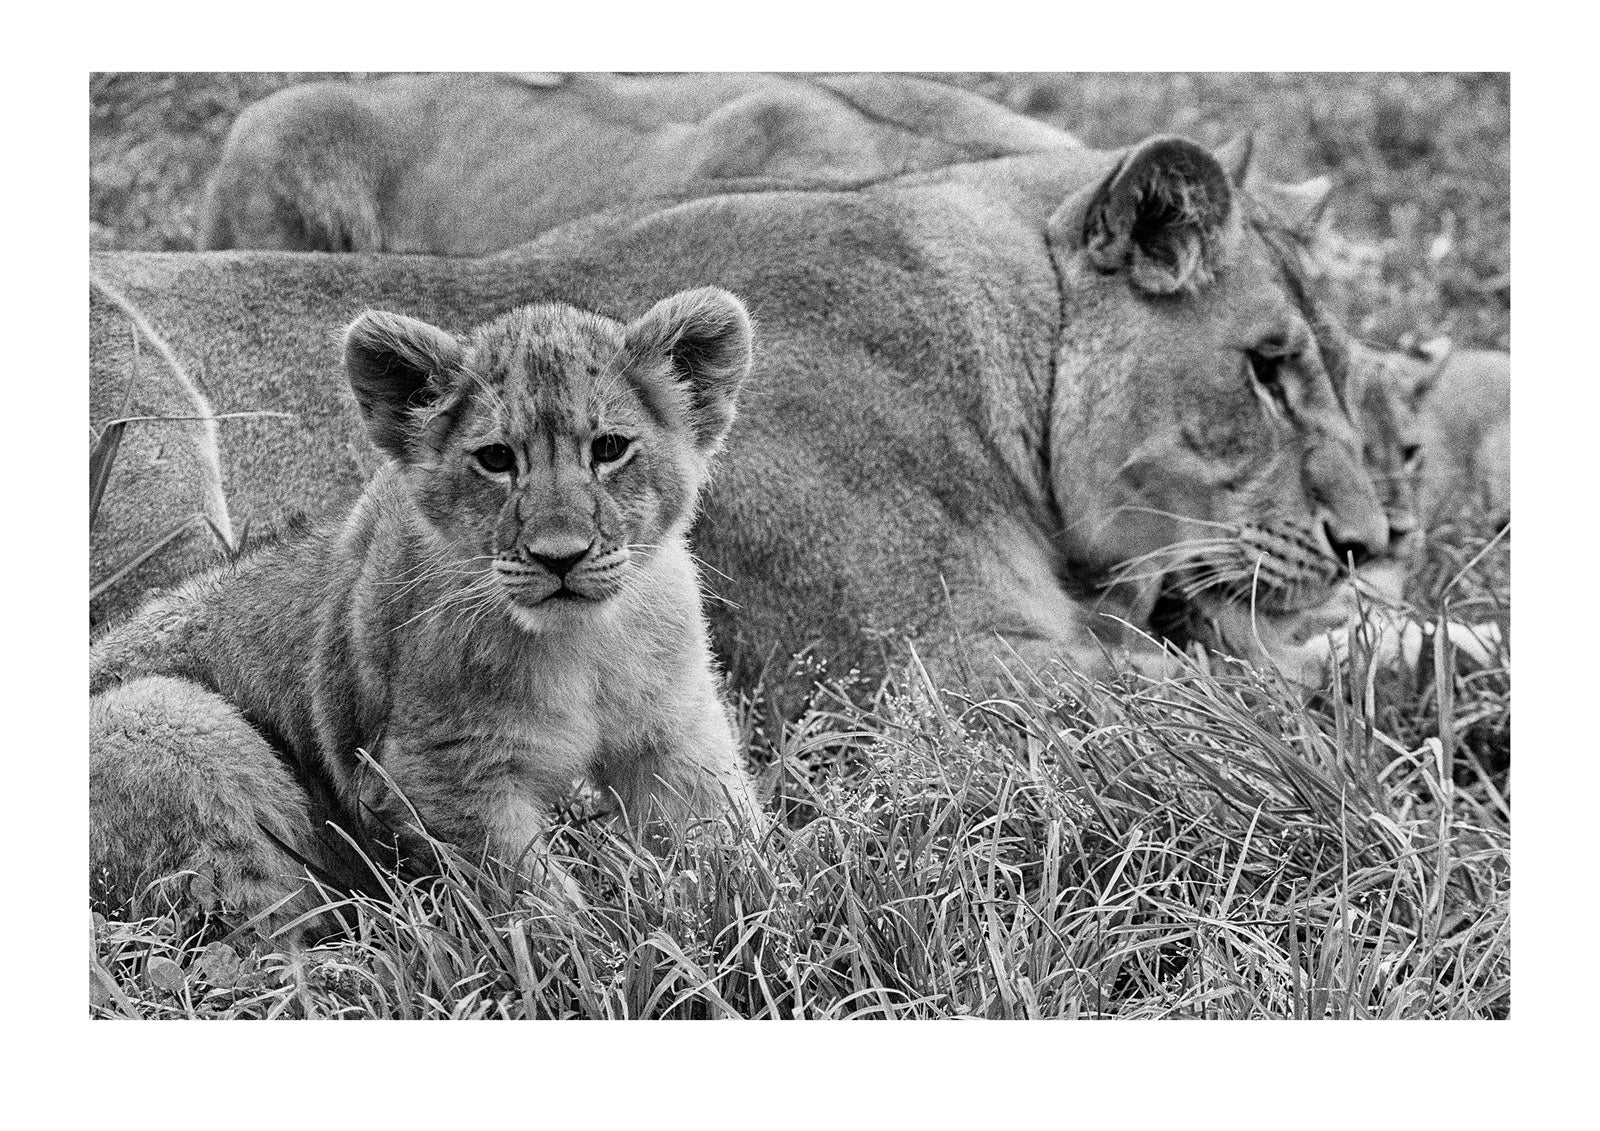 Lion cubs stay close to their mothers and aunties learning the intricacies of the sisterhood. Captured on Ilford HP5 black and white negative film. Zoological Board of Victoria, Victoria, Australia.